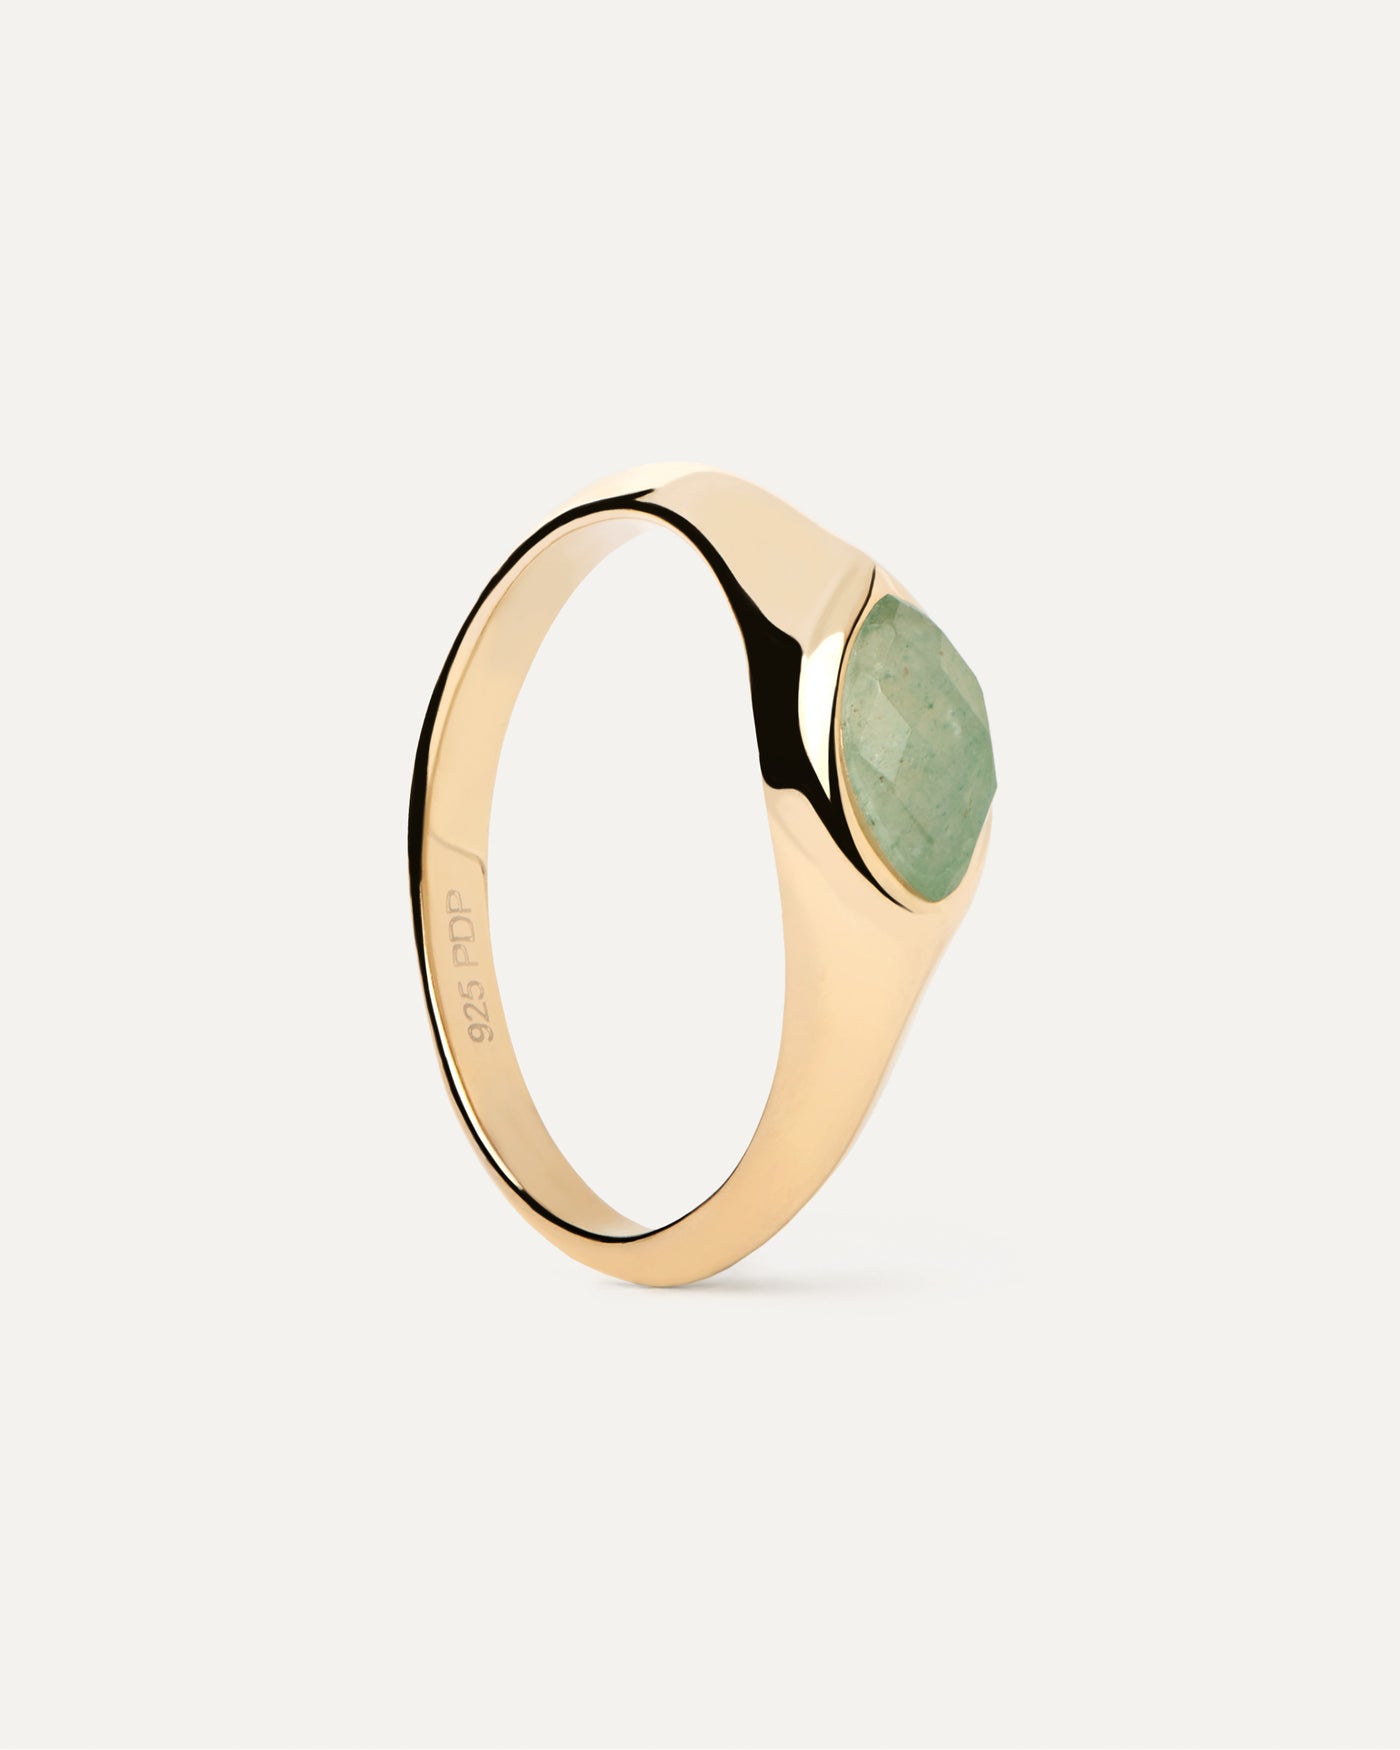 2023 Selection | Green Aventurine Nomad Stamp Ring. Gold-plated signet ring embellished with marquise cut green gemstone. Get the latest arrival from PDPAOLA. Place your order safely and get this Best Seller. Free Shipping.